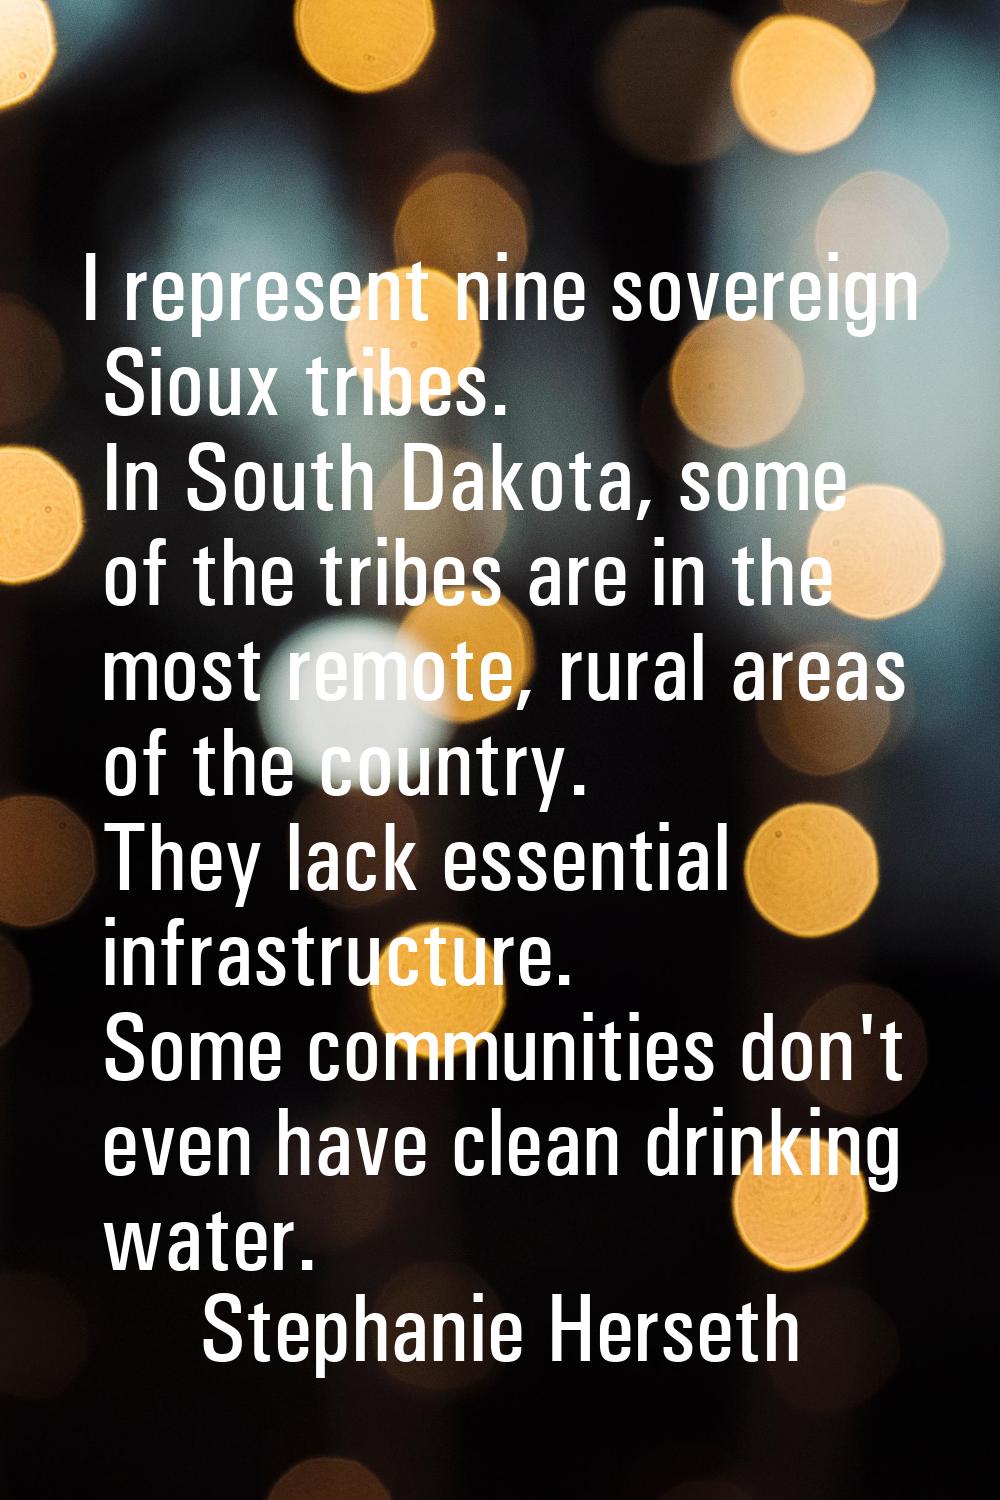 I represent nine sovereign Sioux tribes. In South Dakota, some of the tribes are in the most remote